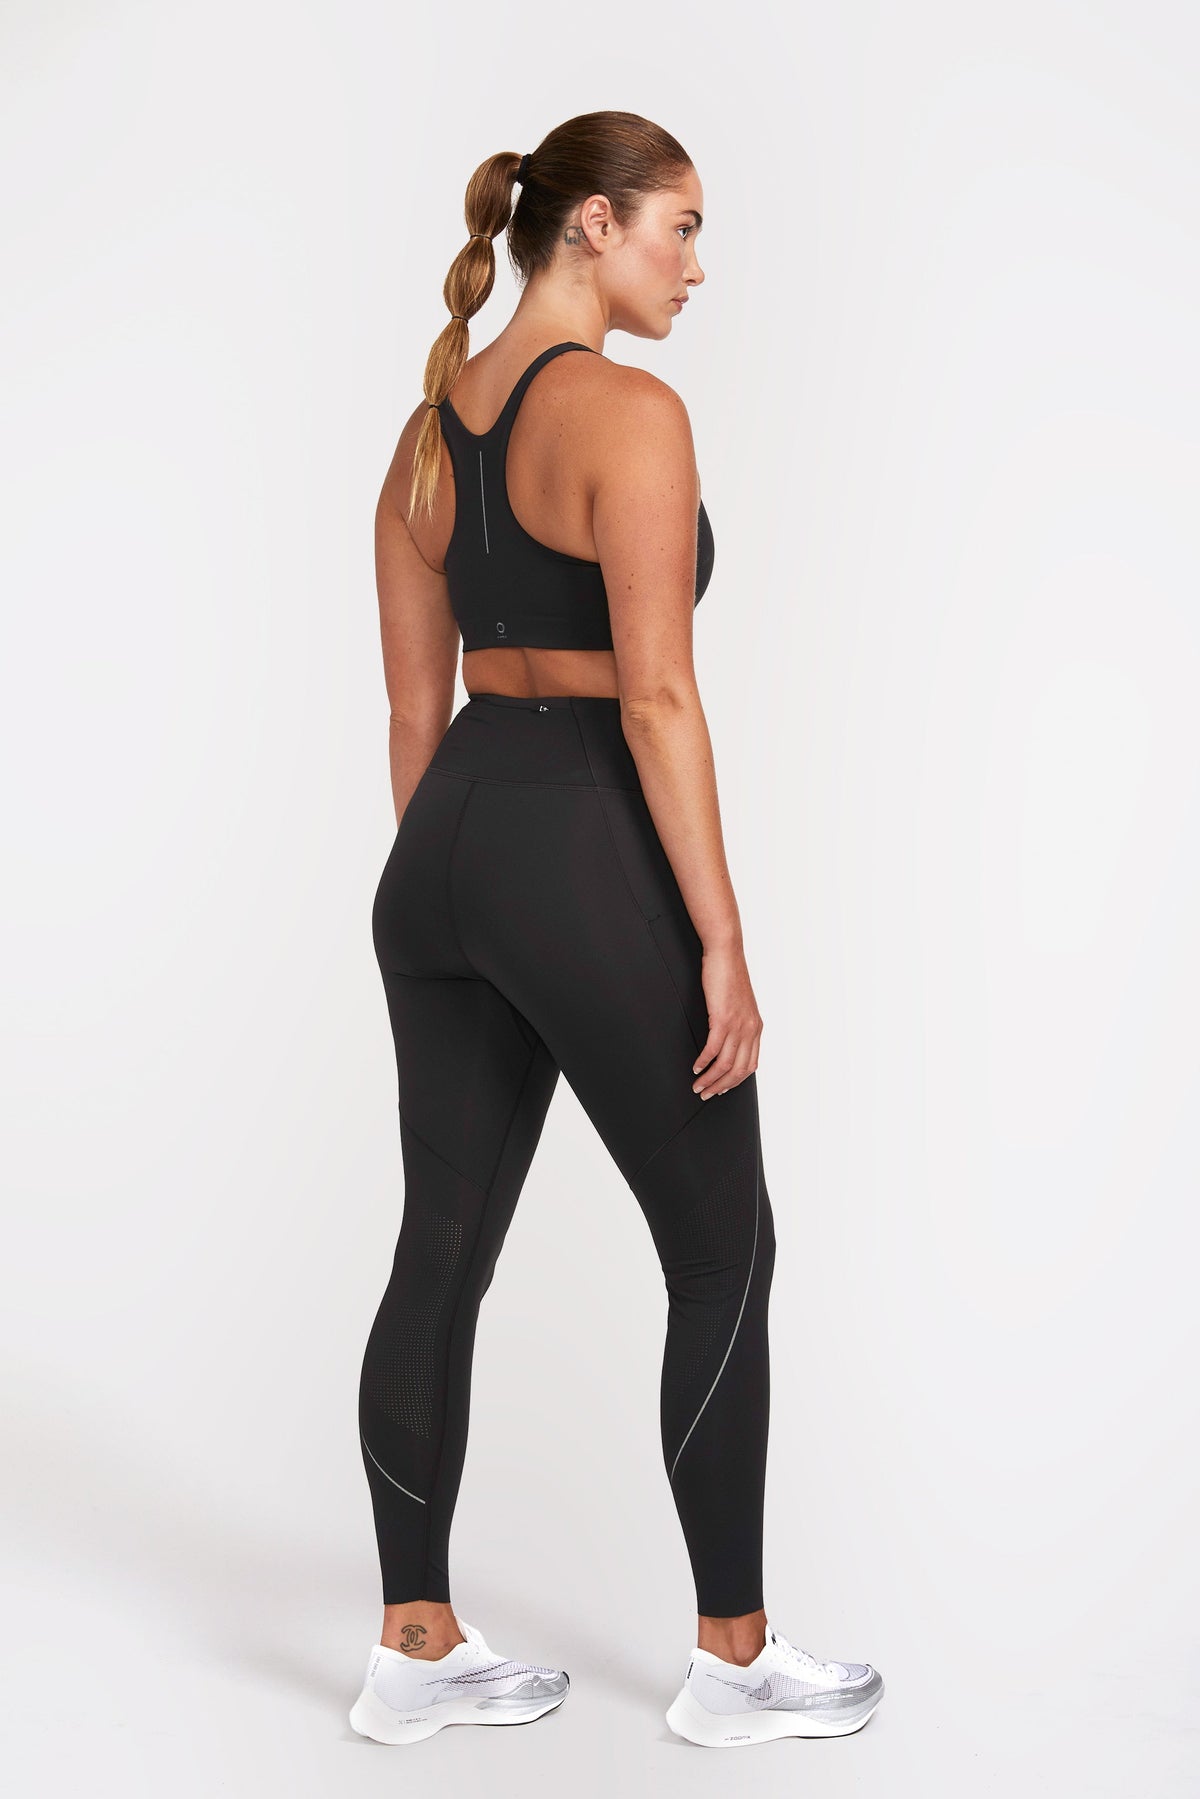 Racerback sports bra made from eco-friendly materials in black color